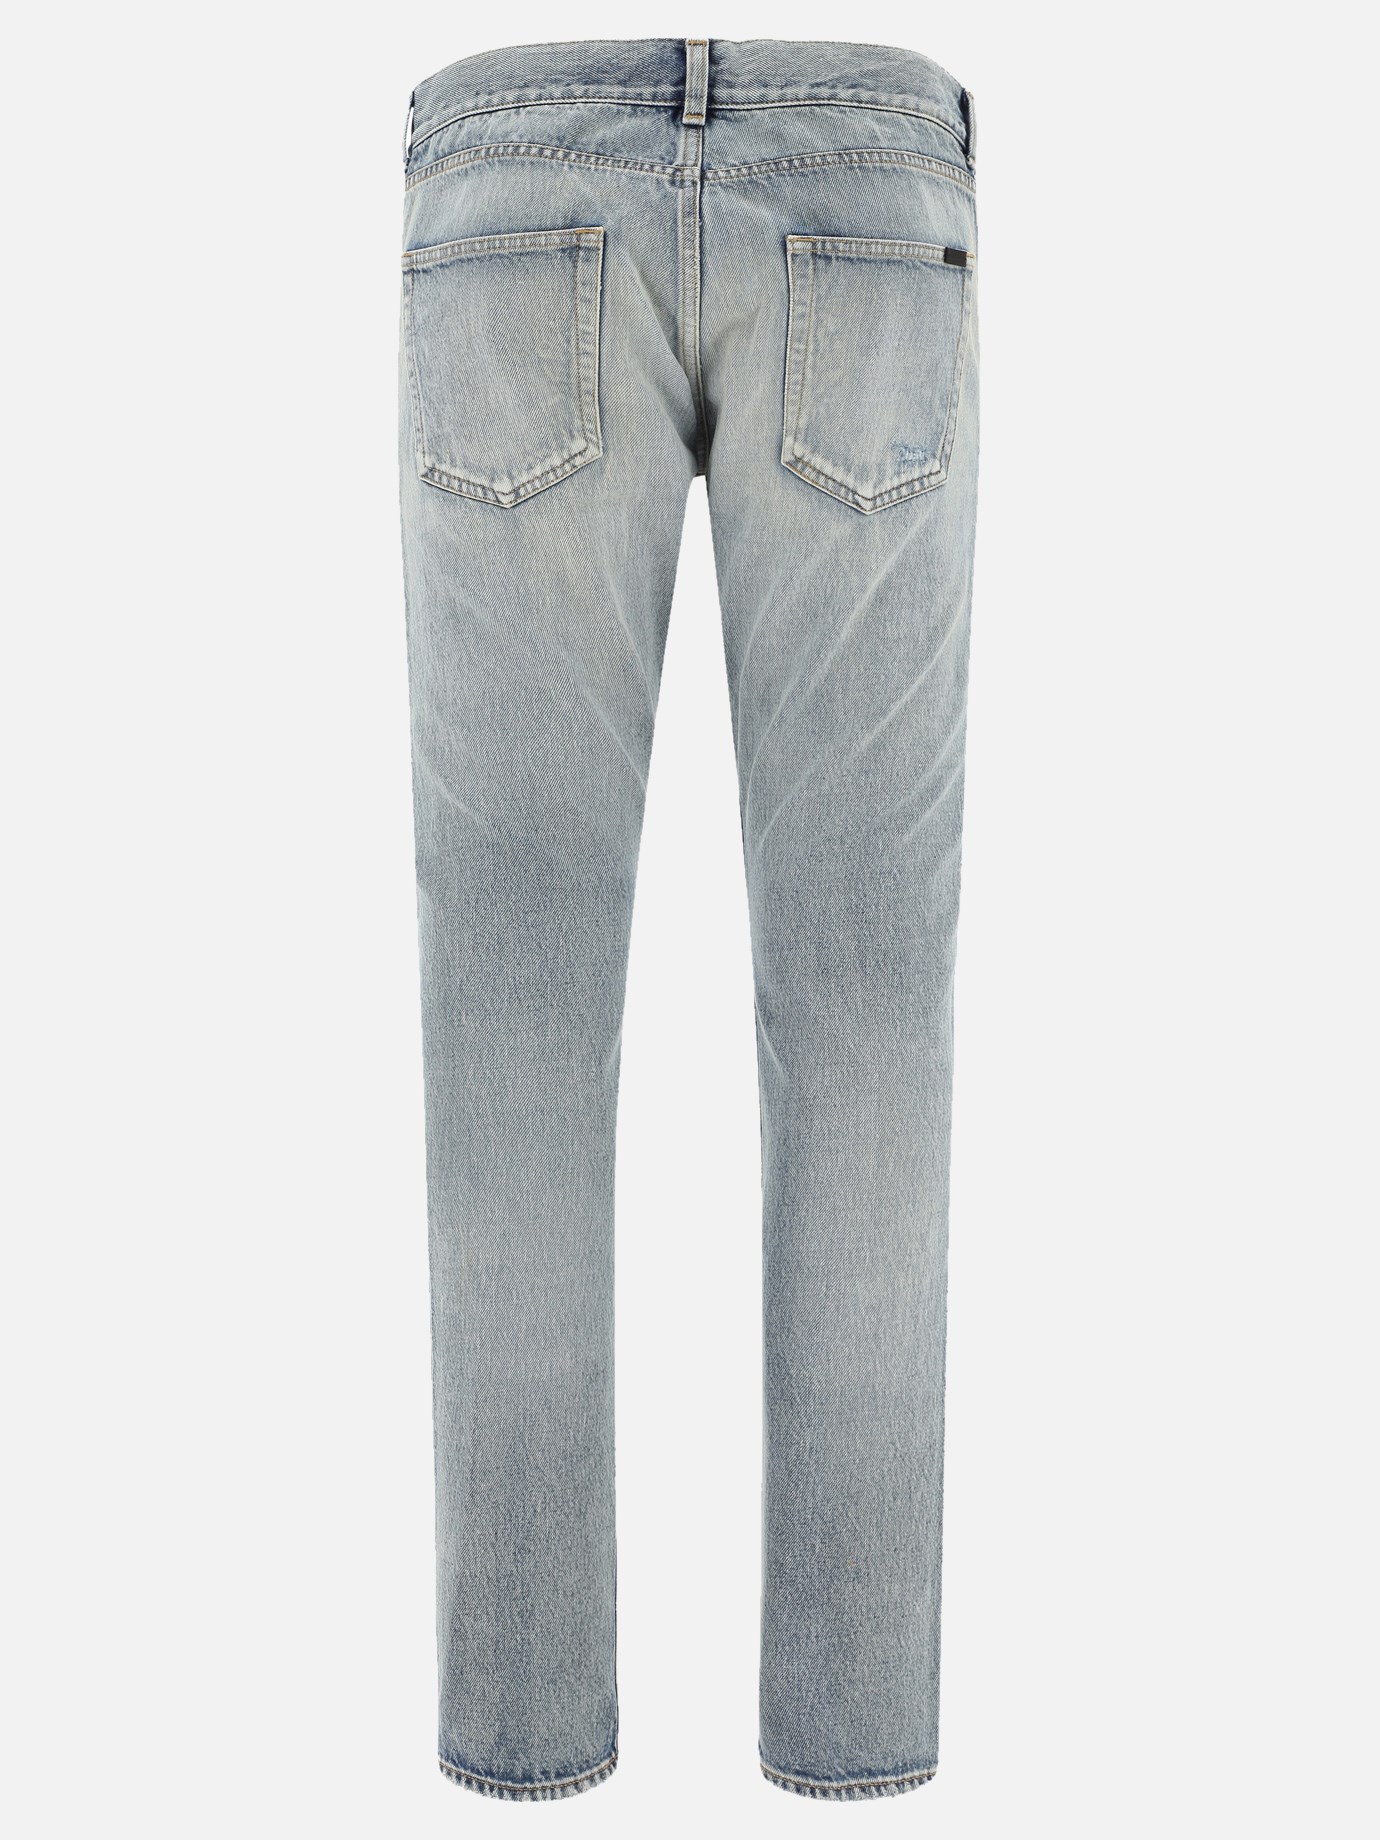 Jeans con strappi by Saint Laurent